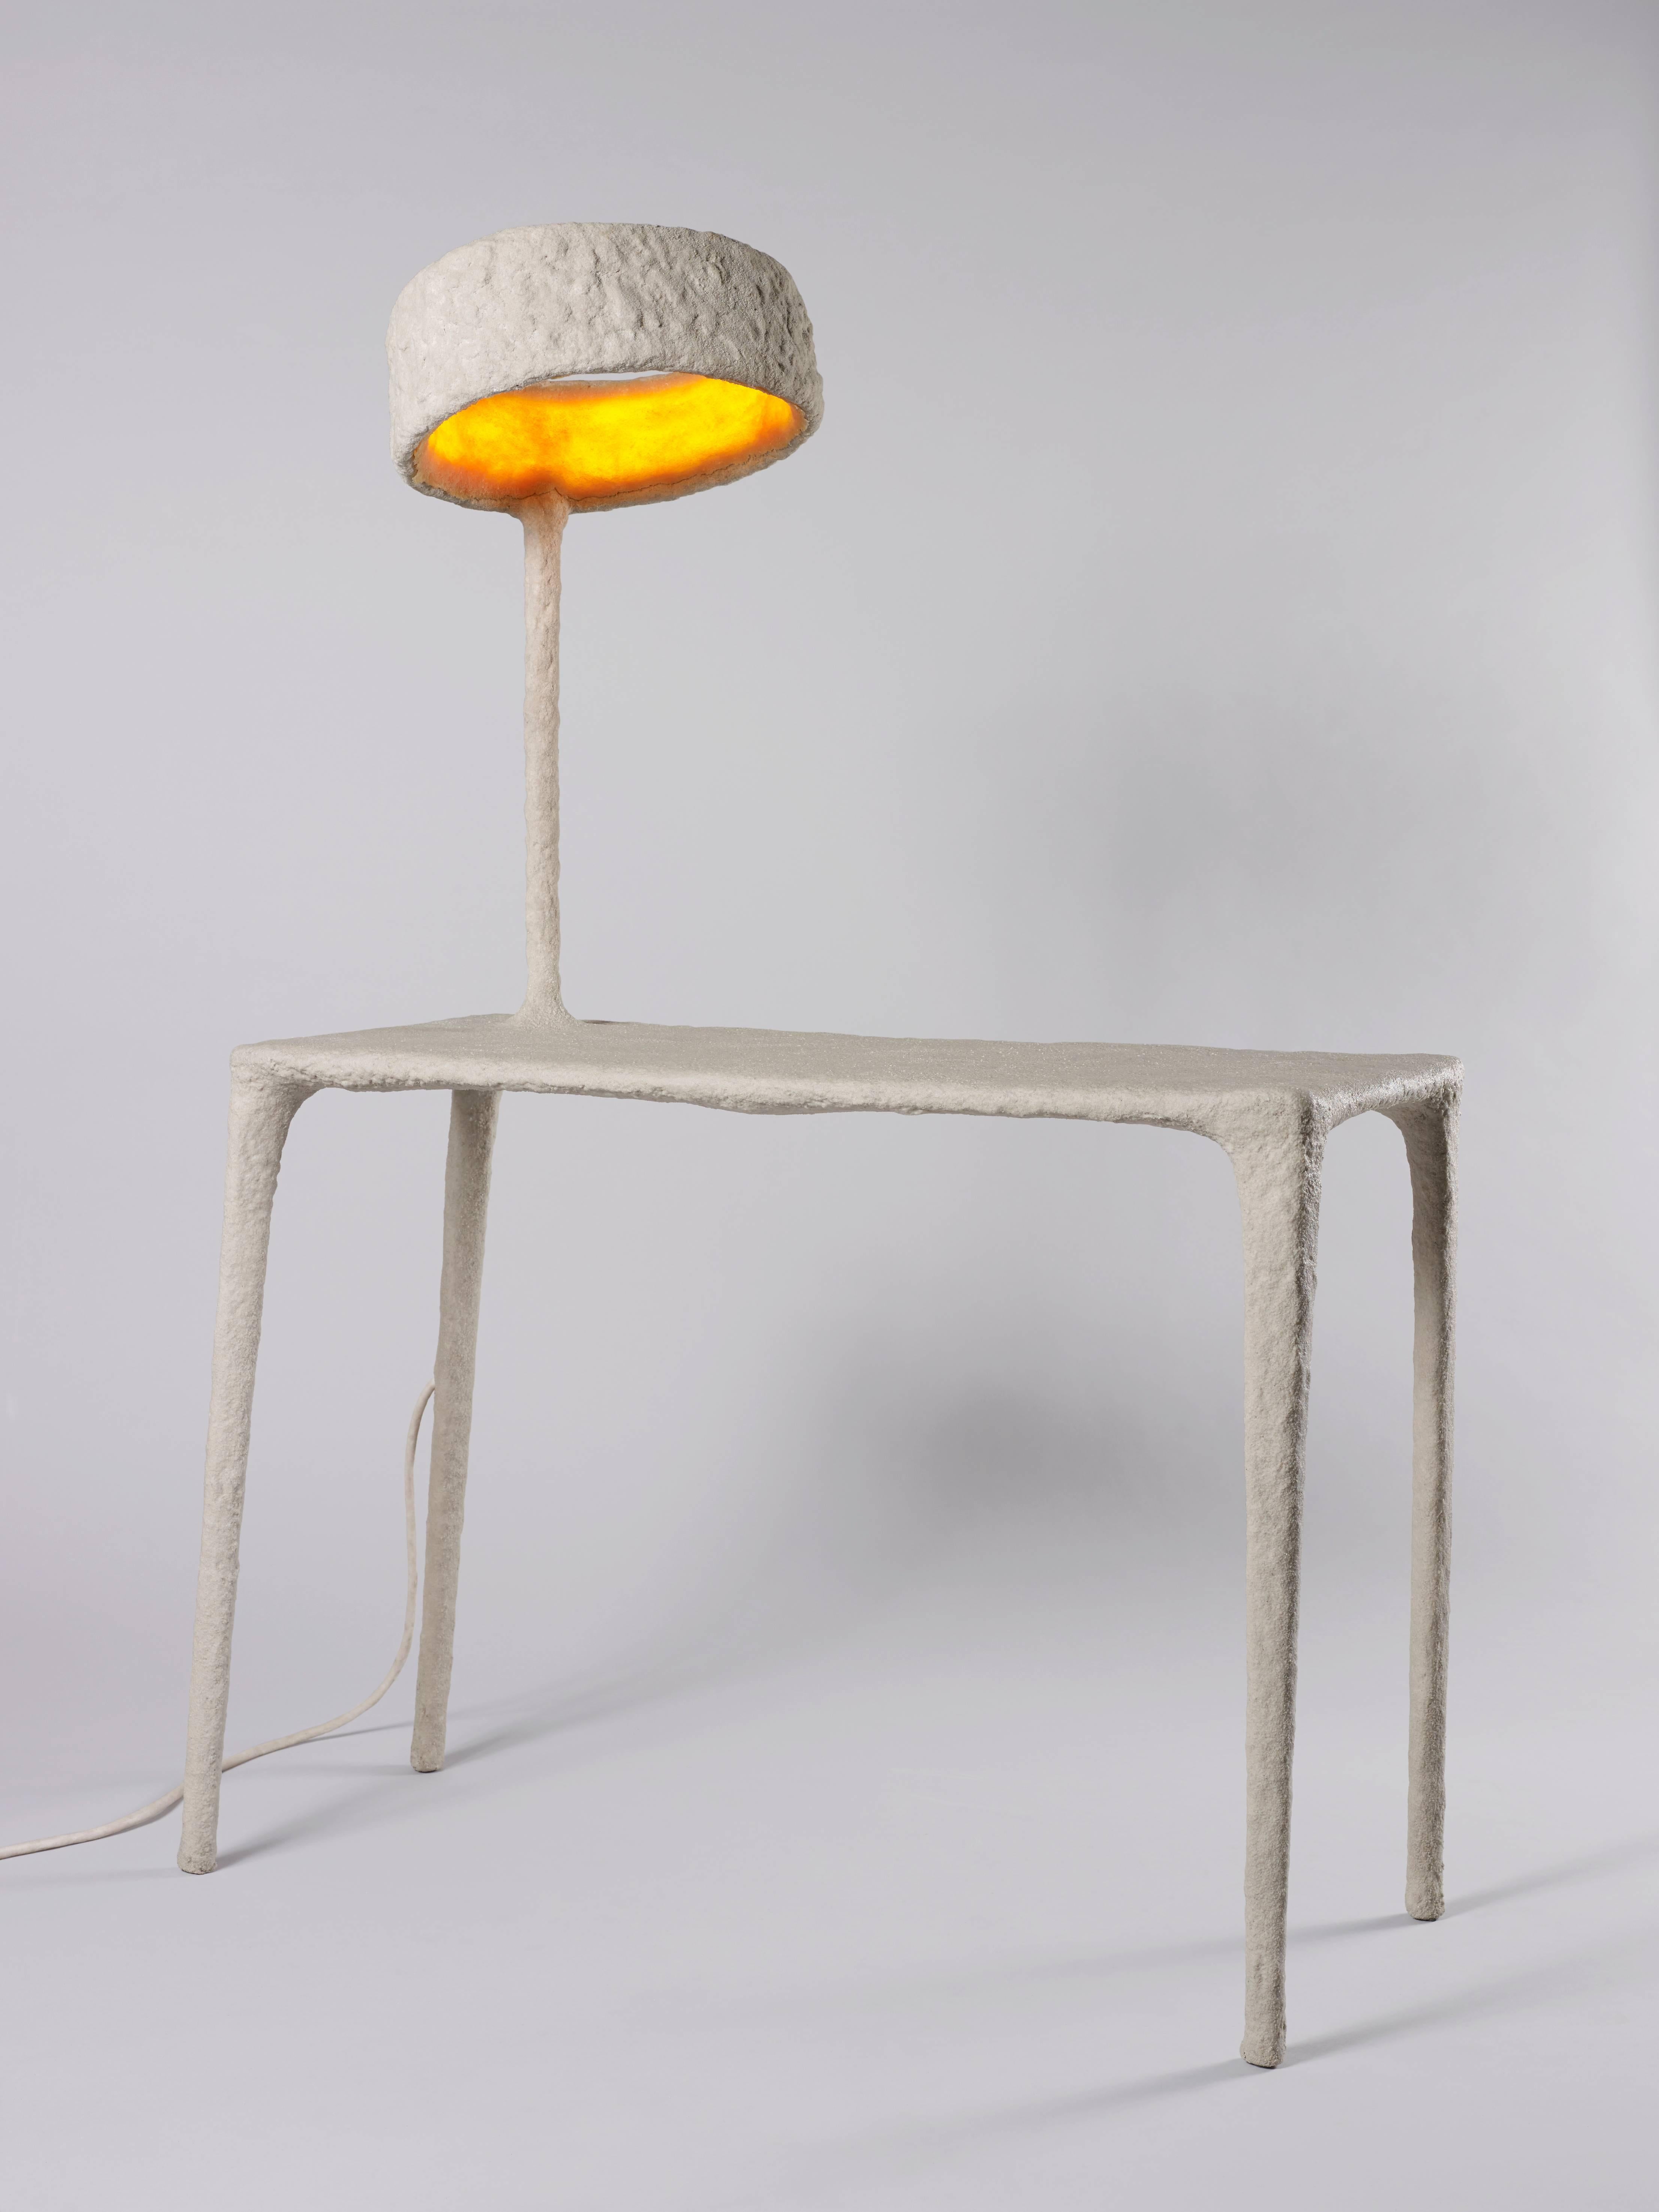 Dutch Hybrid 'Luciferase' combining Console and Light by Nacho Carbonell - In Stock